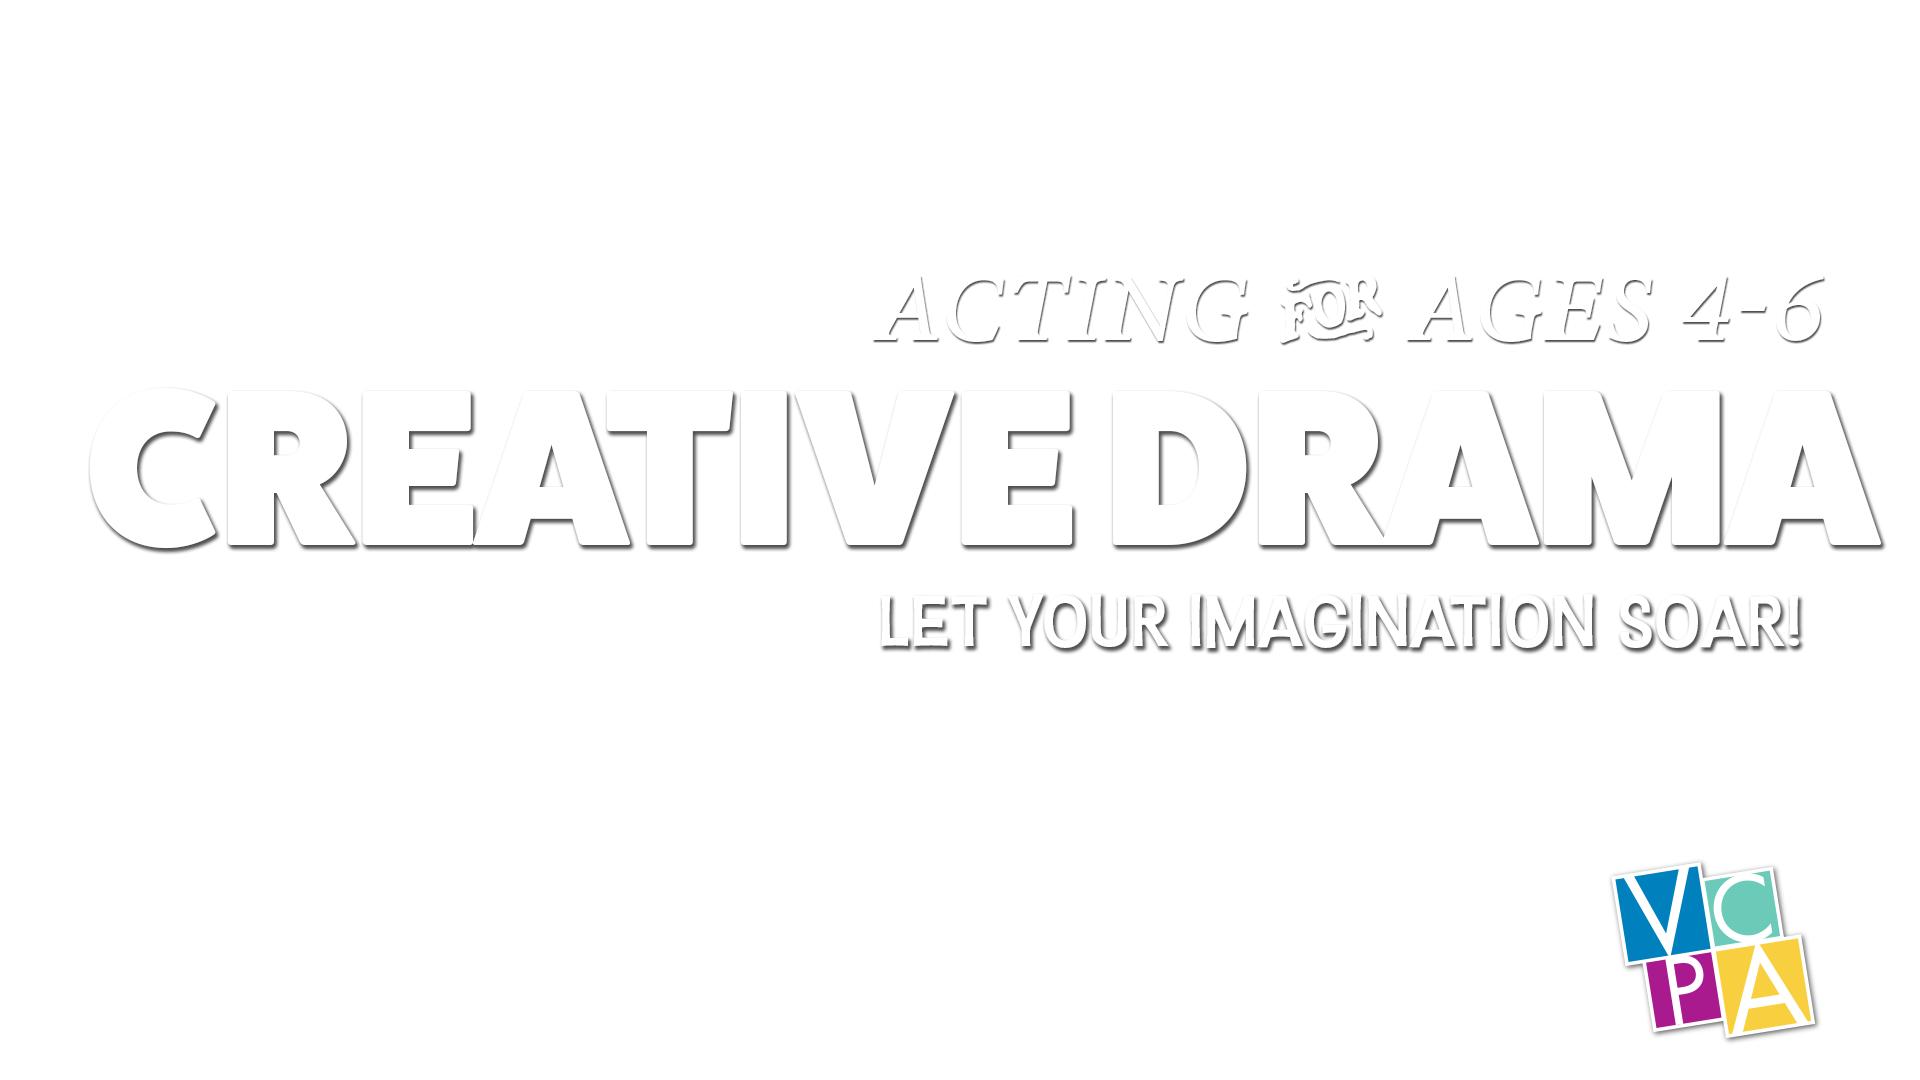 Creative Drama - Acting for Ages 4-6